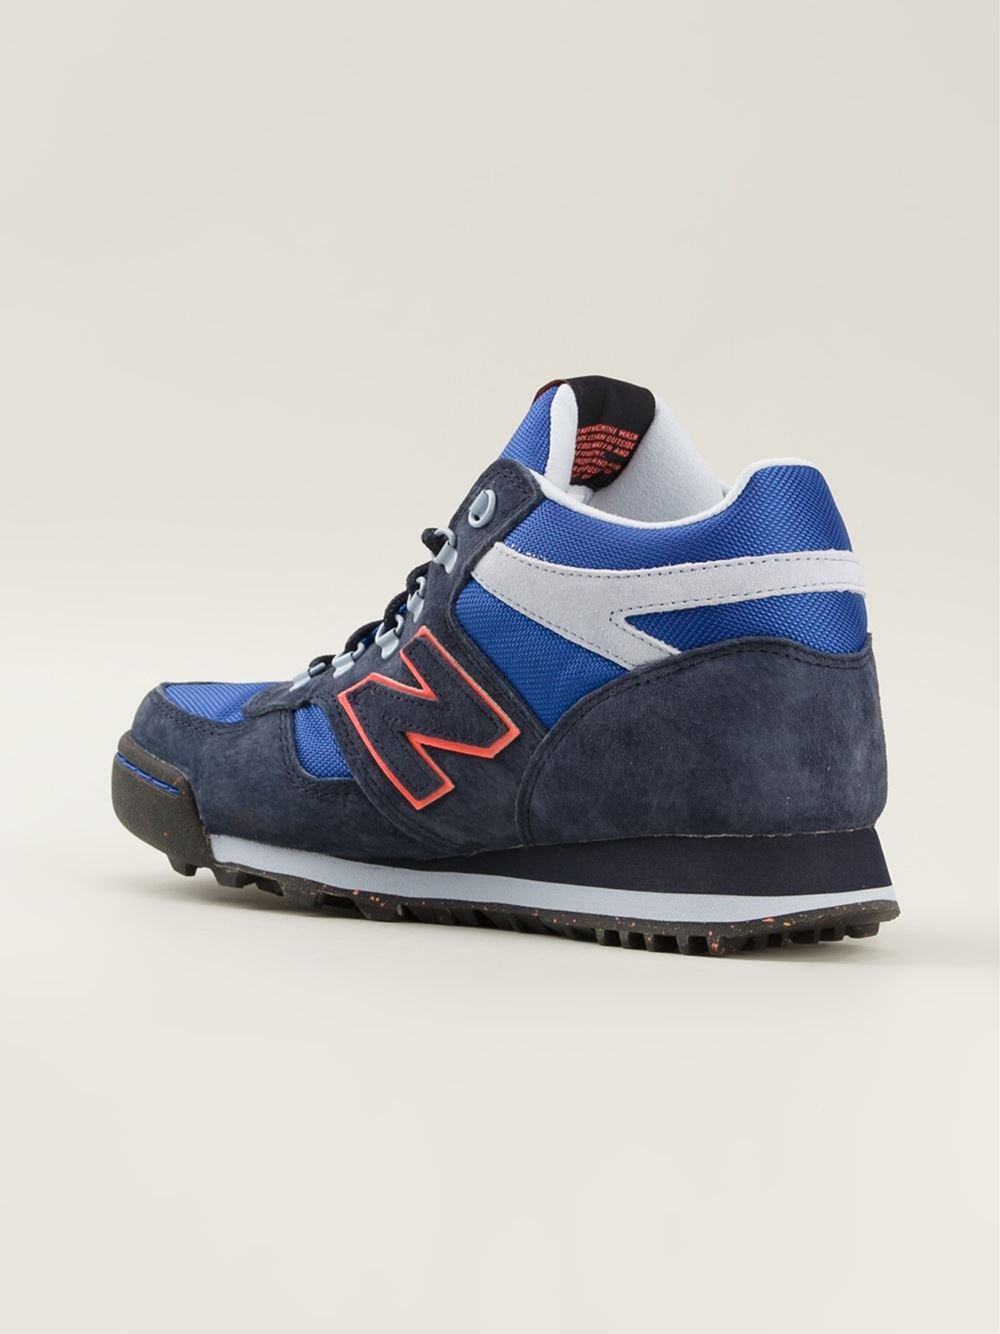 Lyst - New Balance 'H710' Hi-Top Sneakers in Blue for Men